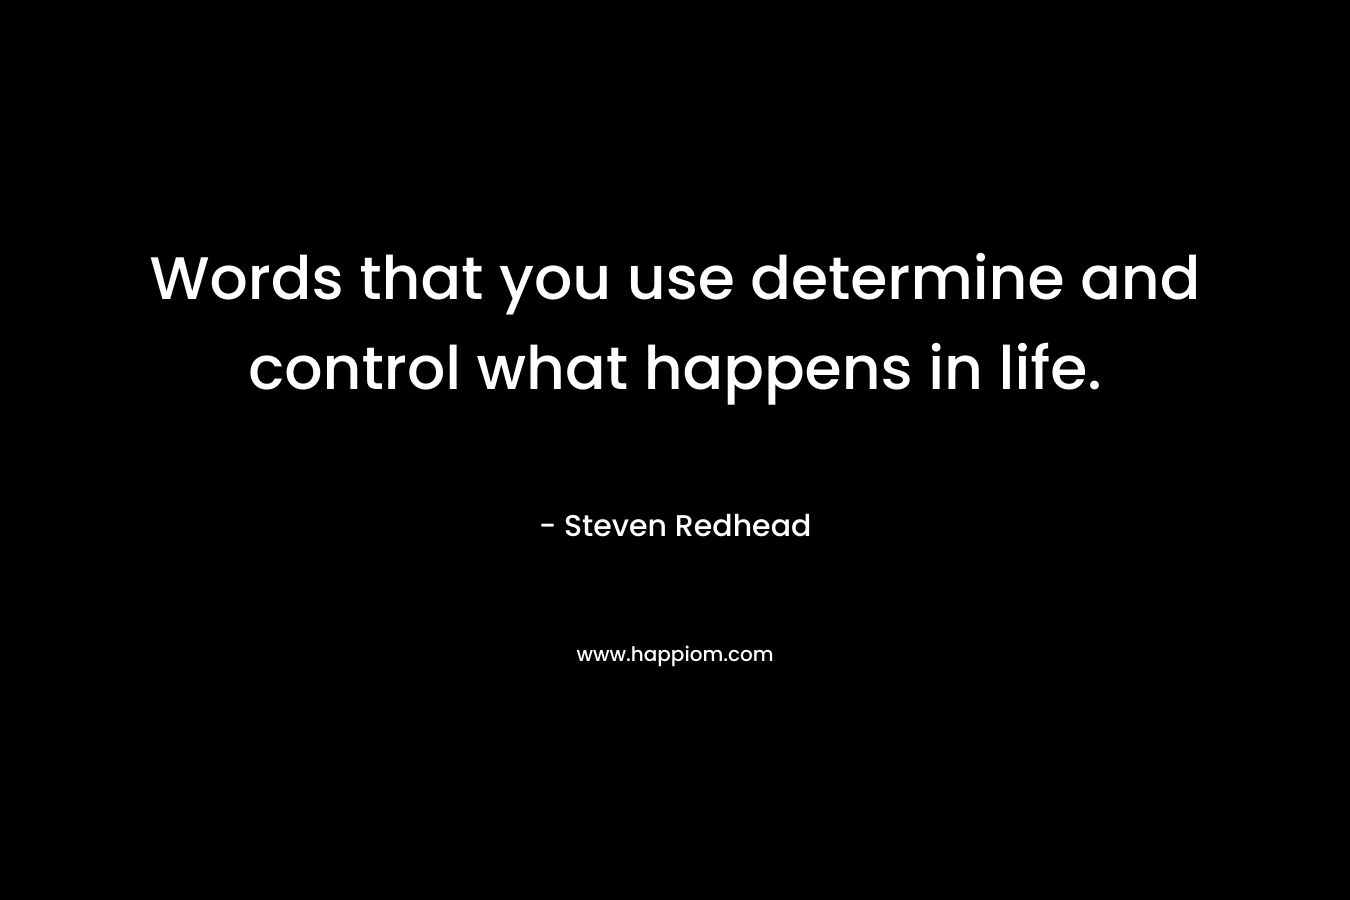 Words that you use determine and control what happens in life.